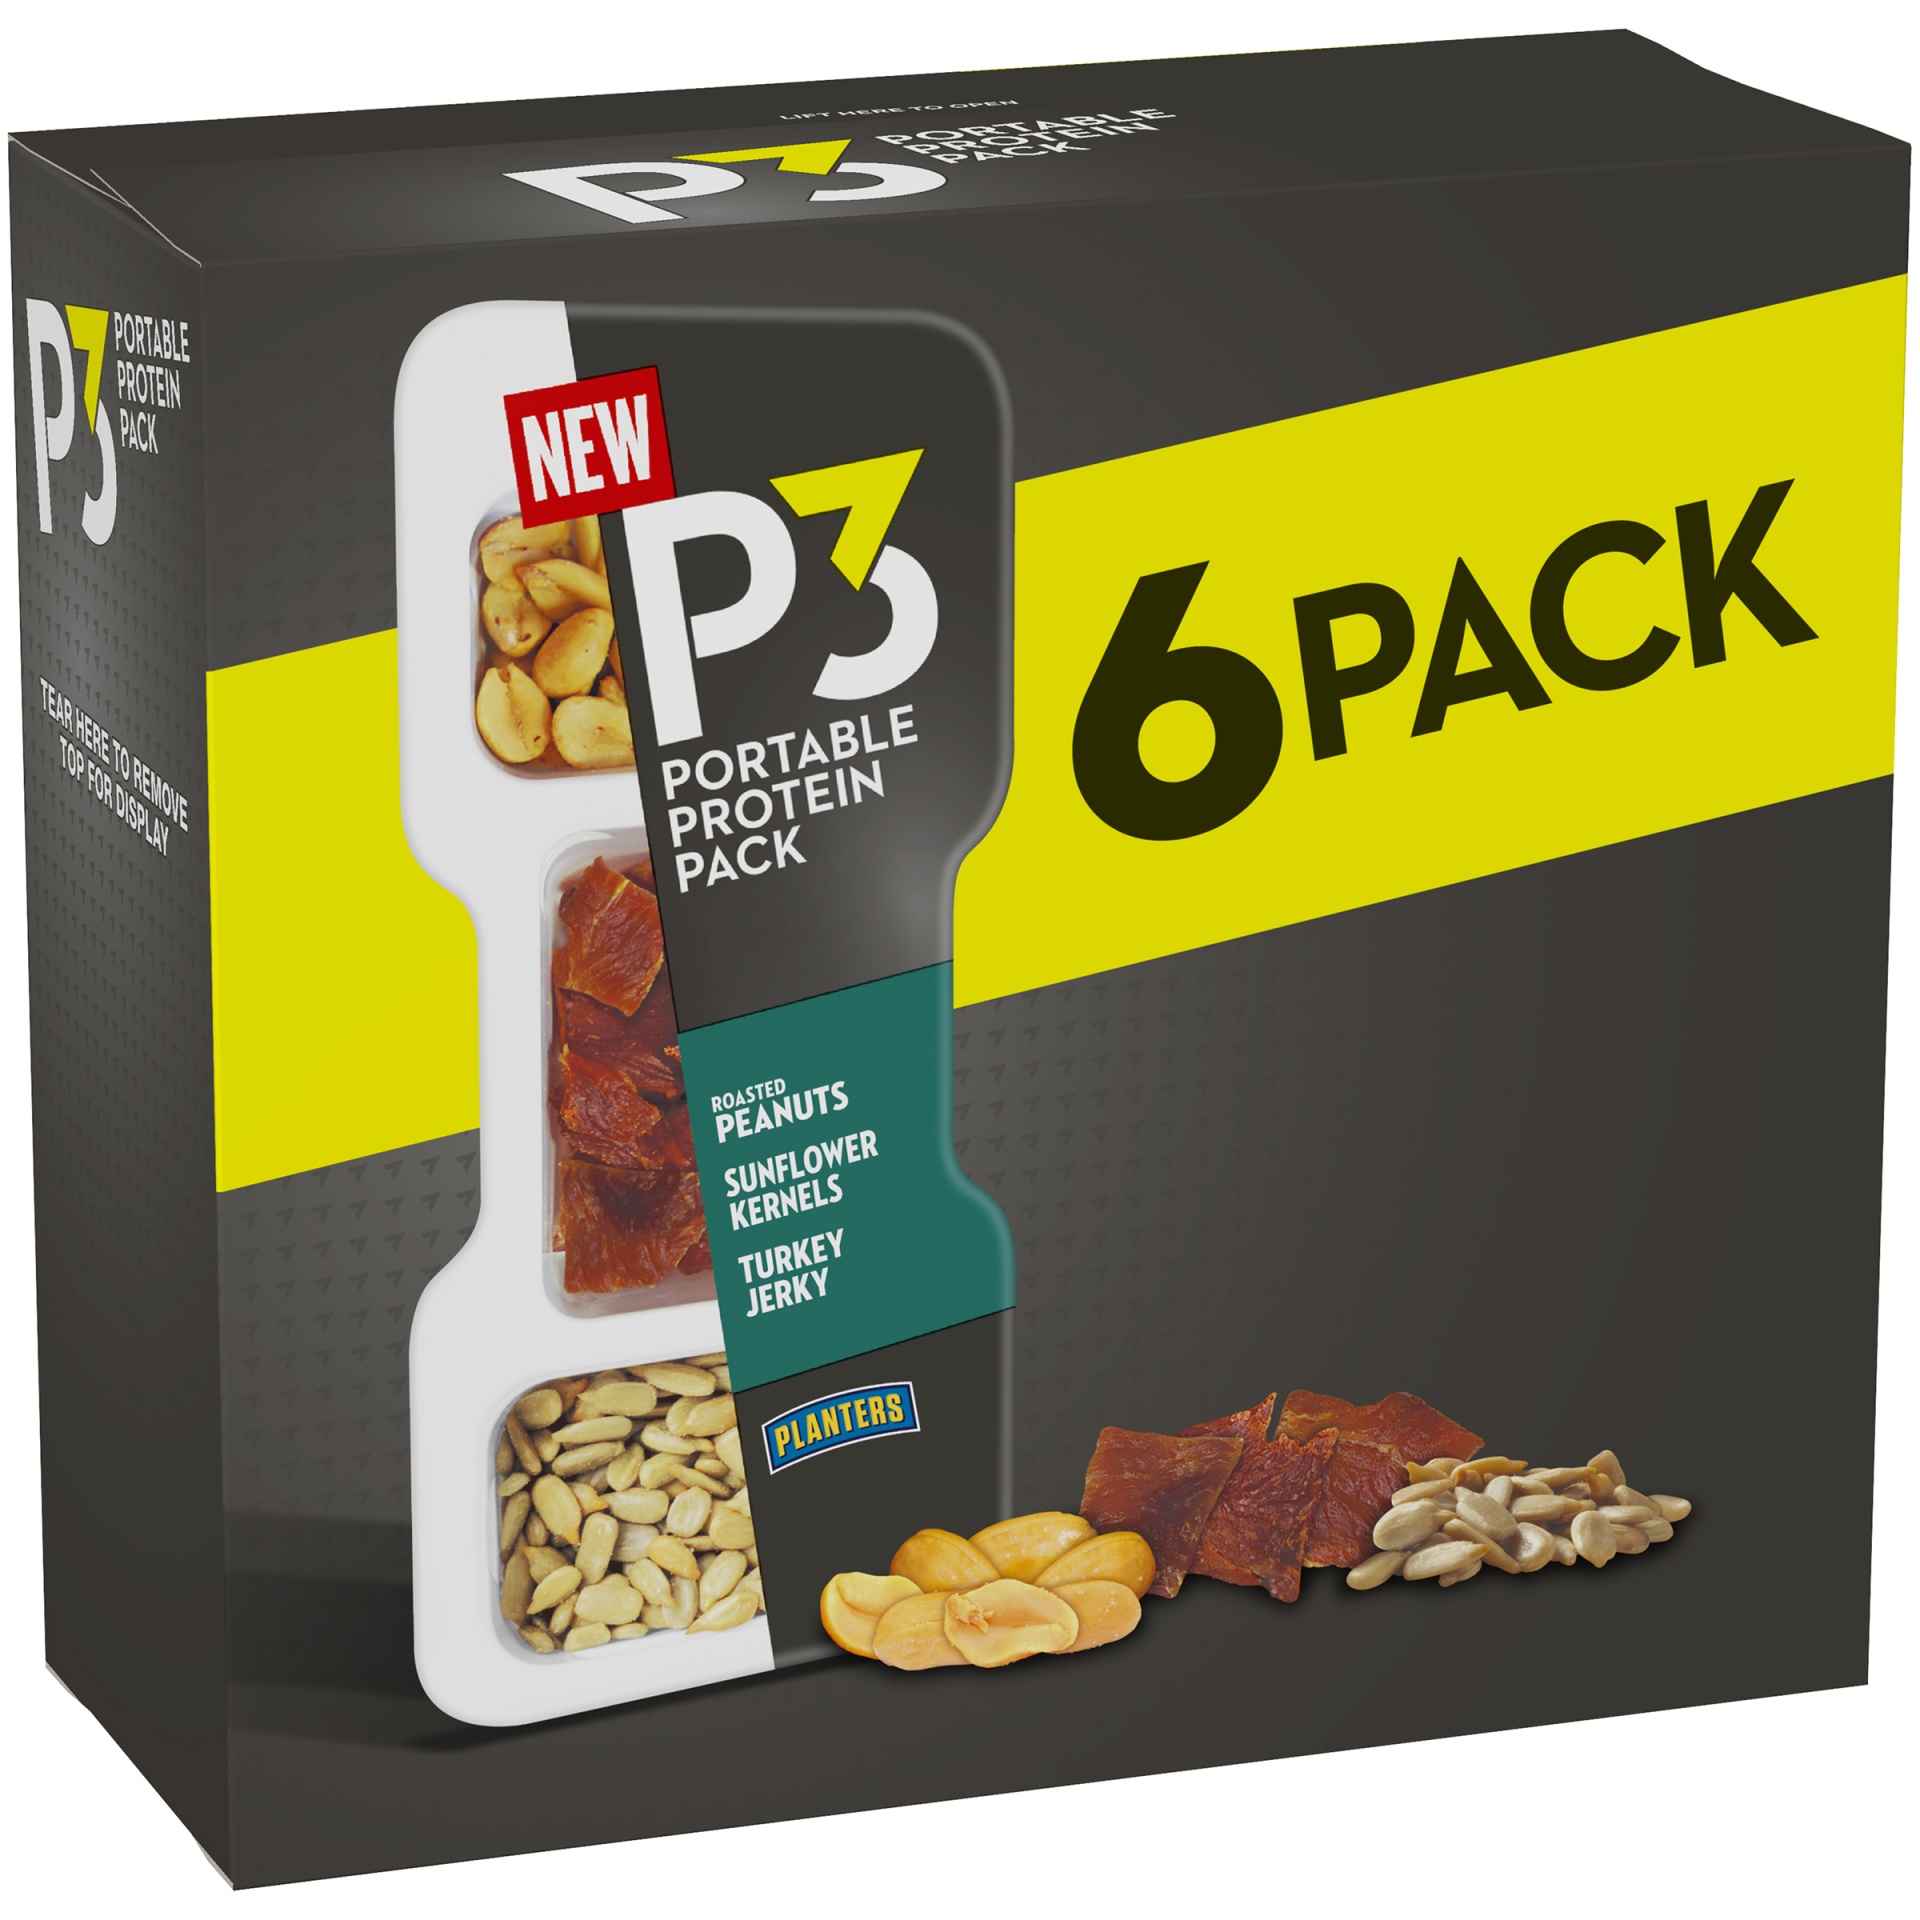 slide 2 of 4, P3 Portable Protein Snack Pack with Roasted Peanuts, Sunflower Kernels & Turkey Jerky Trays, 6 ct